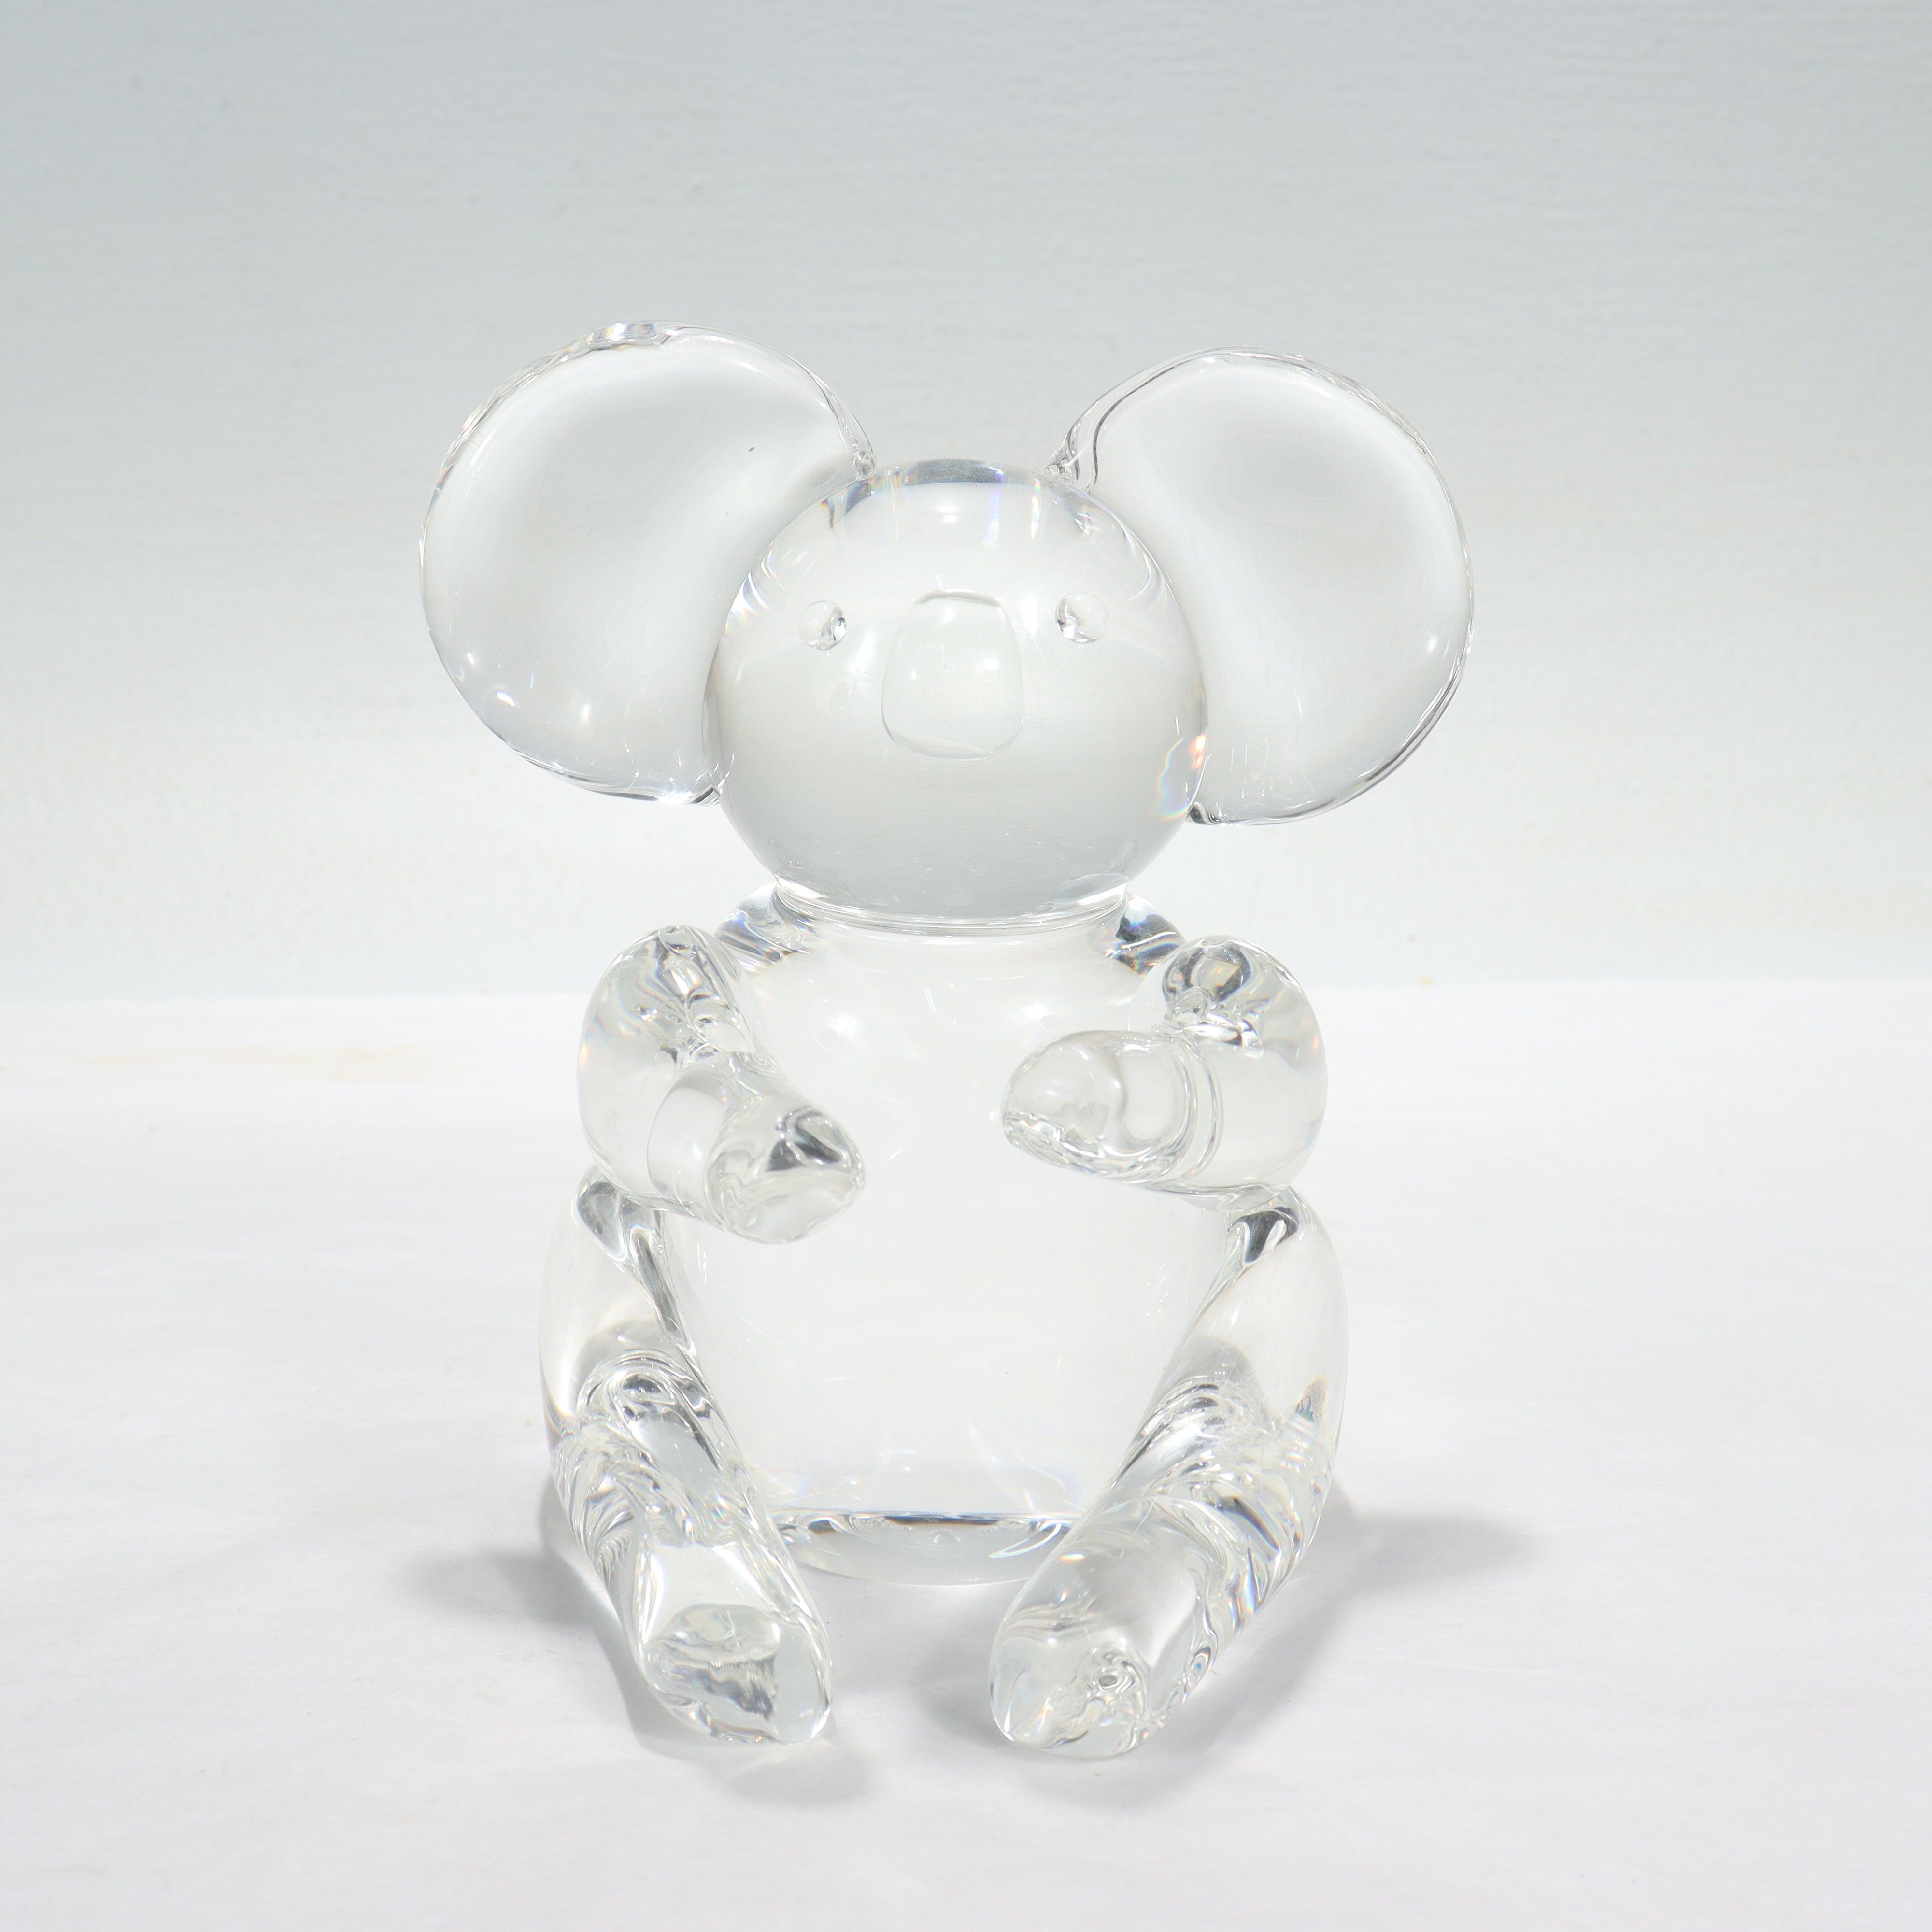 A fine art glass koala bear figurine or sculpture.

By Steuben.

Model no. 8268.

Designed by Lloyd Atkins.

Simply a wonderful koala figurine from Steuben!

Date:
Mid-20th Century

Overall Condition:
It is in overall good, as-pictured, used estate